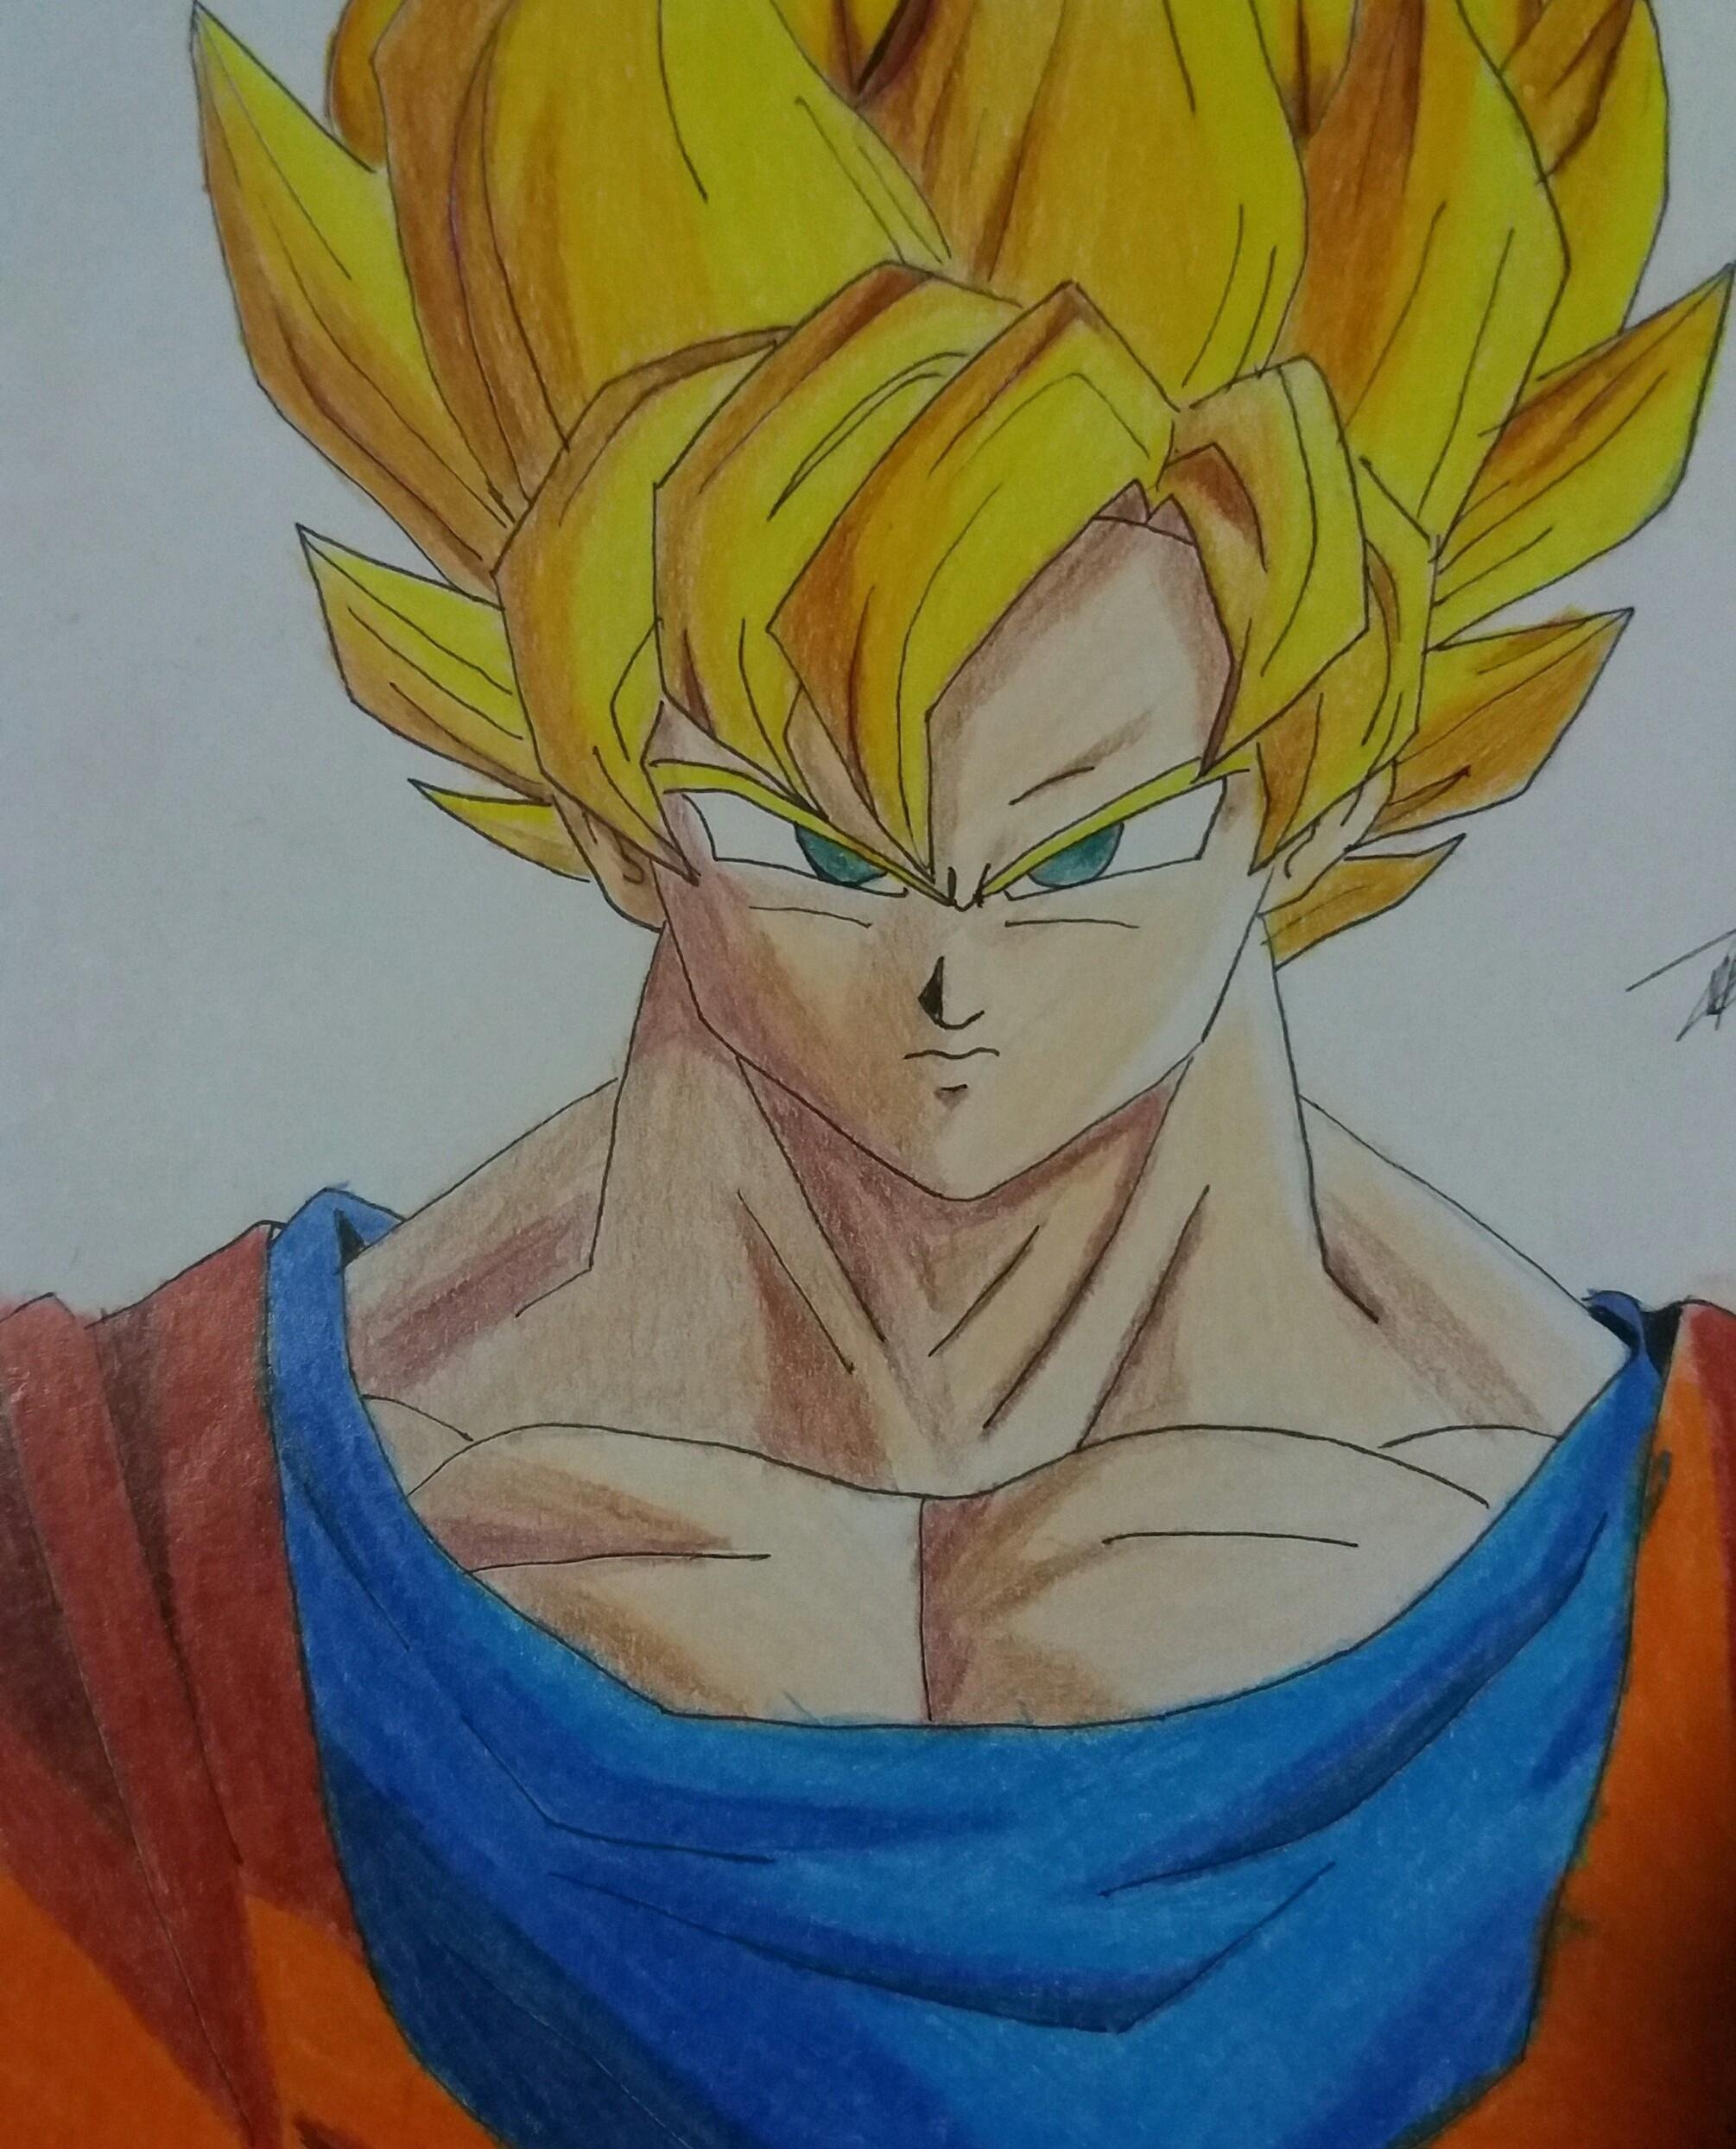 SON GOKU FROM DRAGON BALL Z DRAWING USING COLORED PENCILS STEP BY STEP PROCEDURES